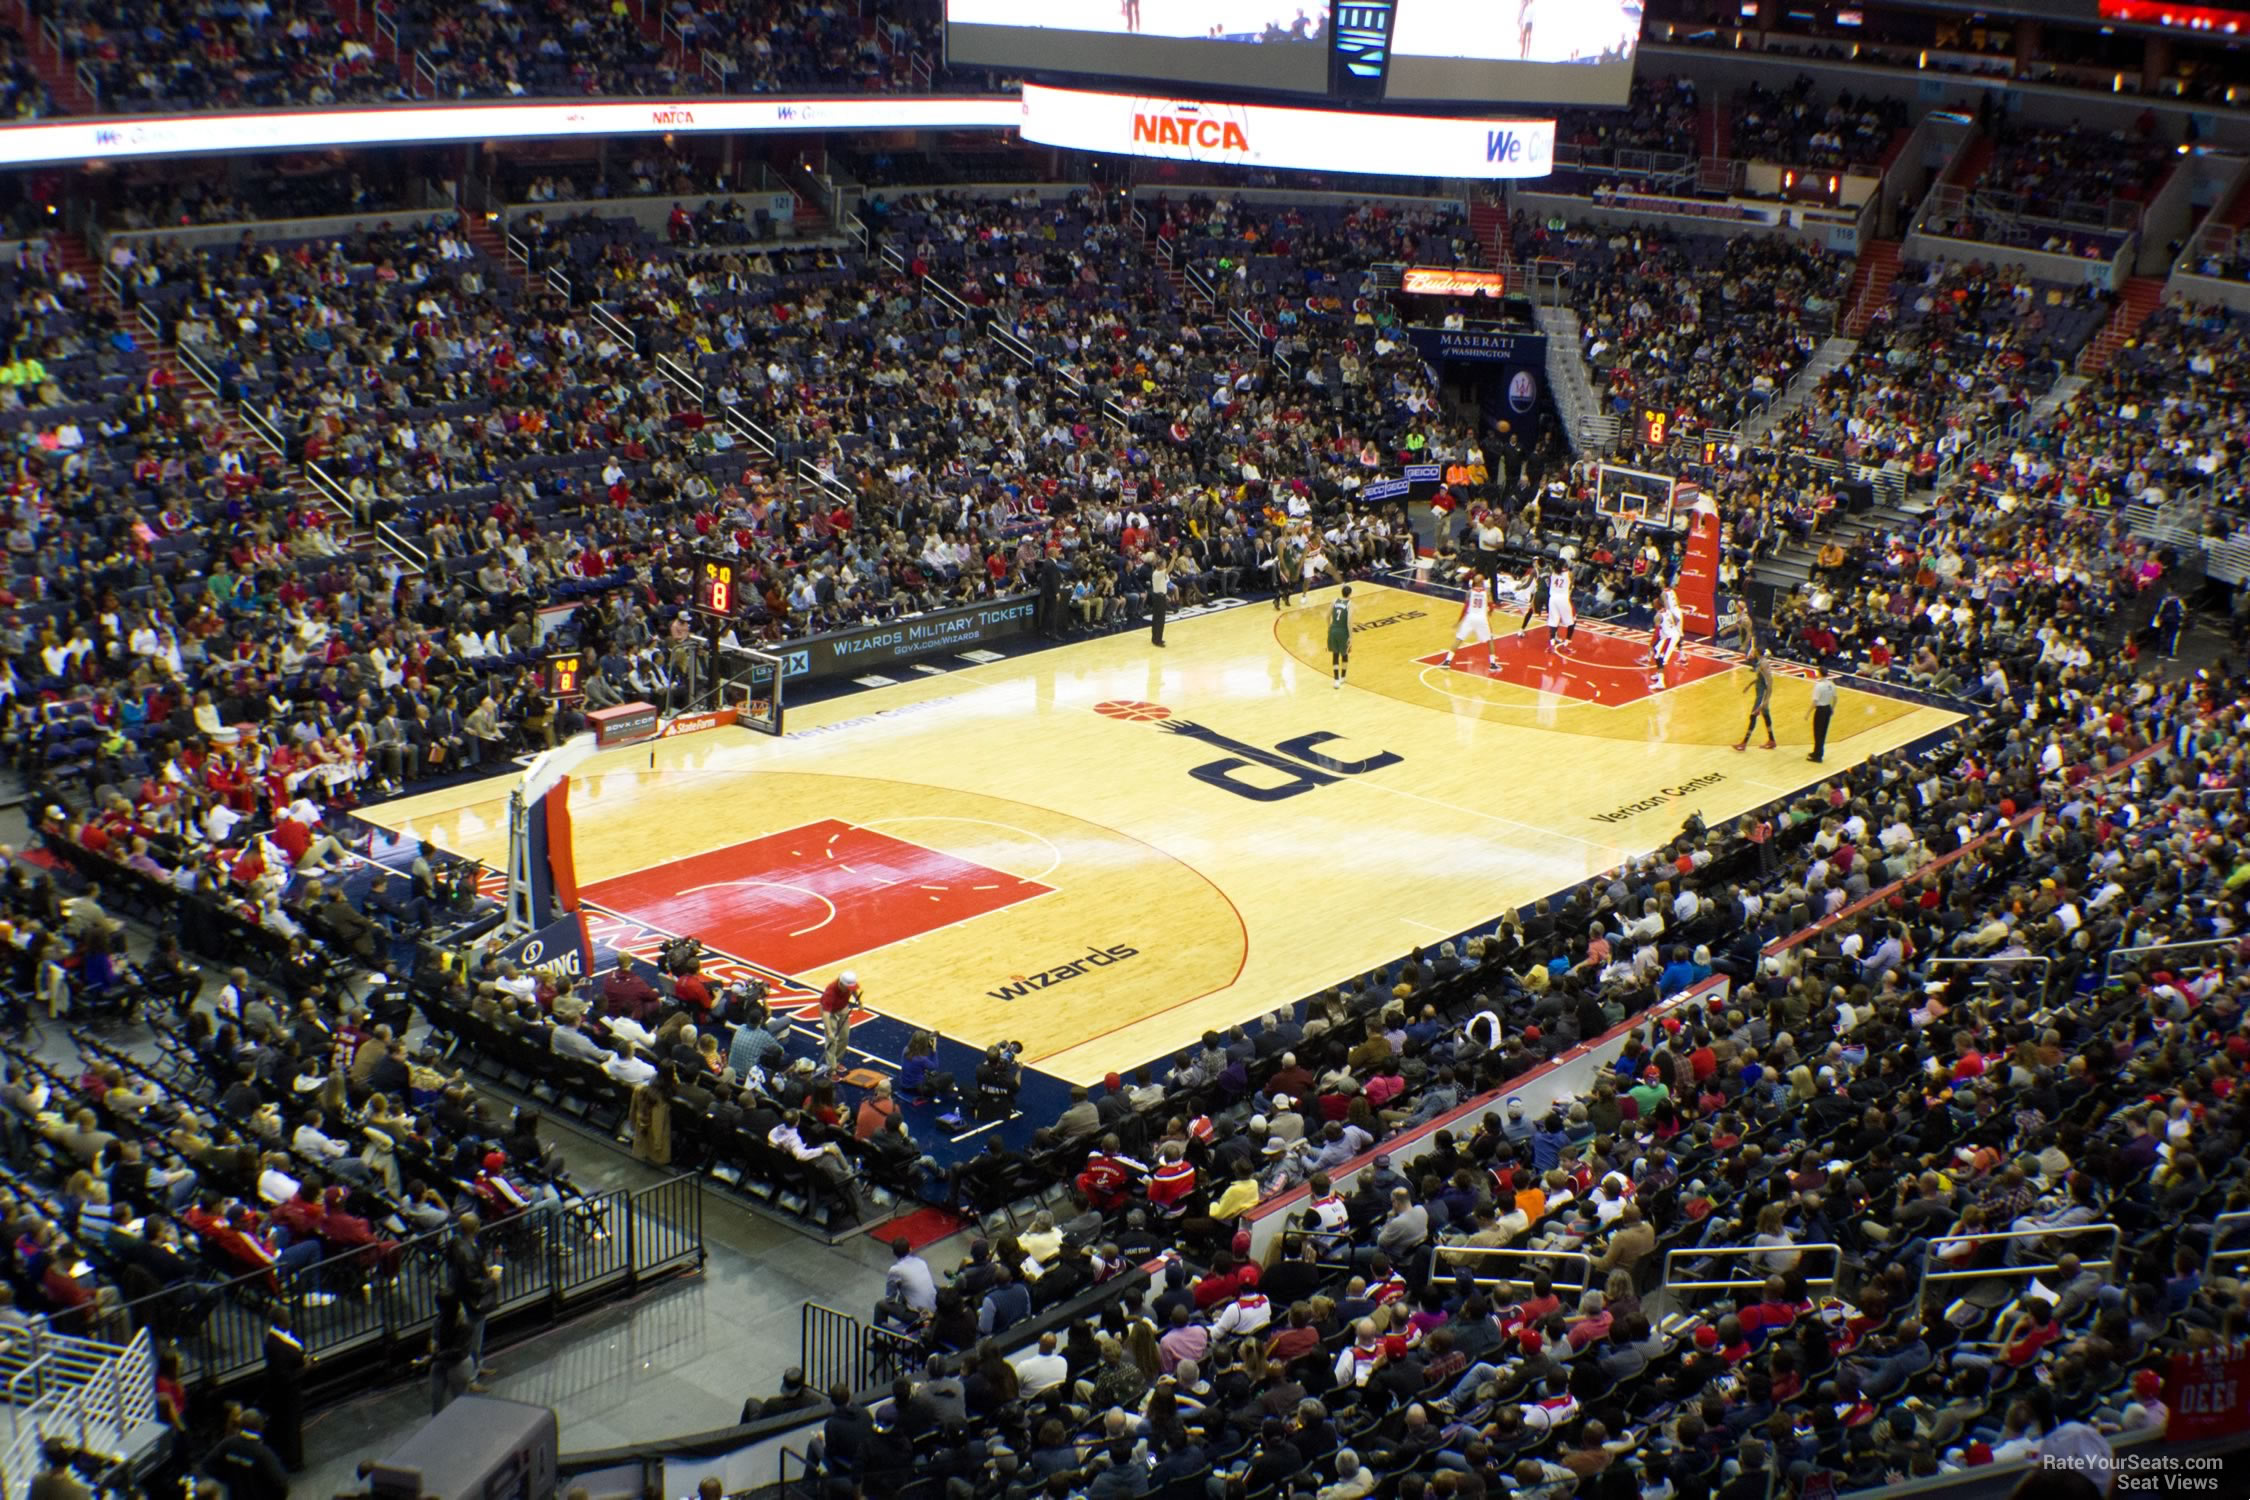 capital one arena basketball court layout